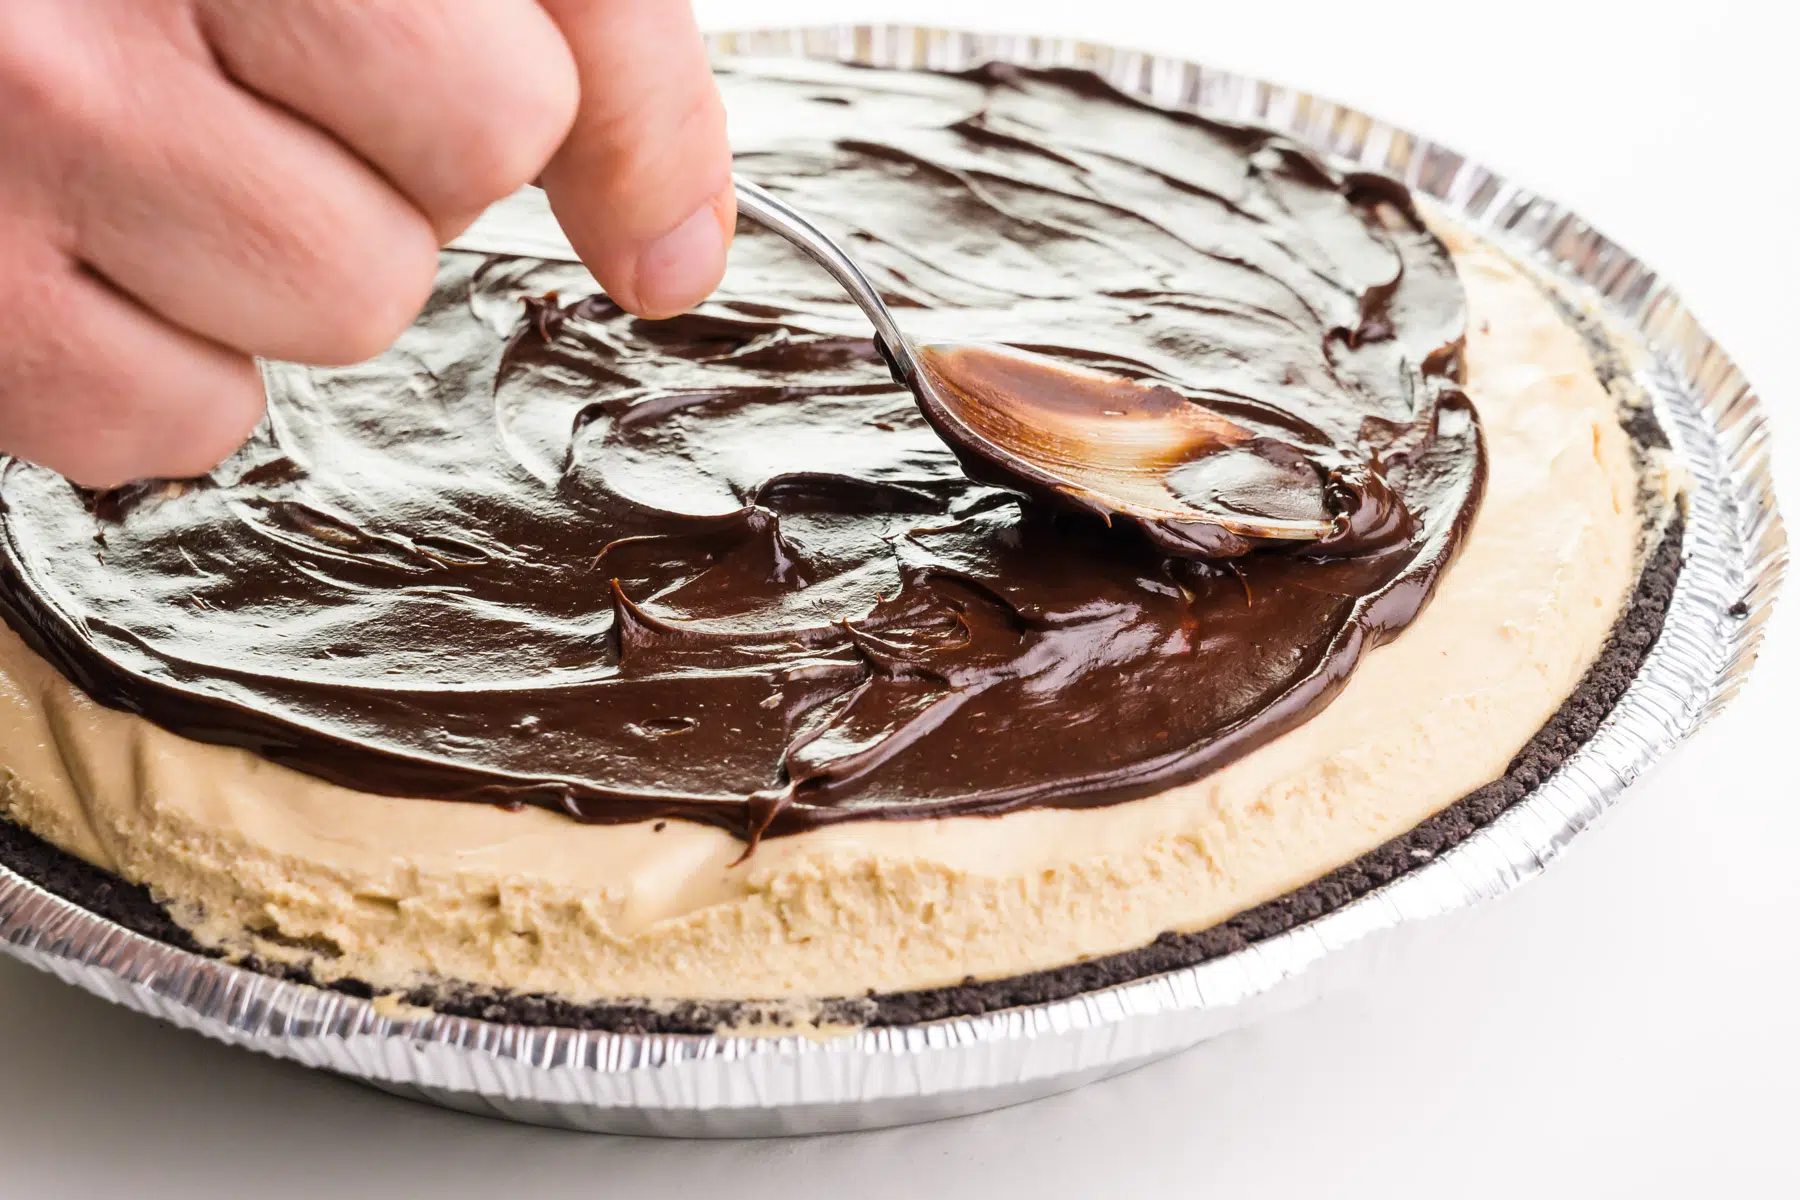 A hand holds a spoon, spreading out a chocolate topping on top of a peanut butter pie.